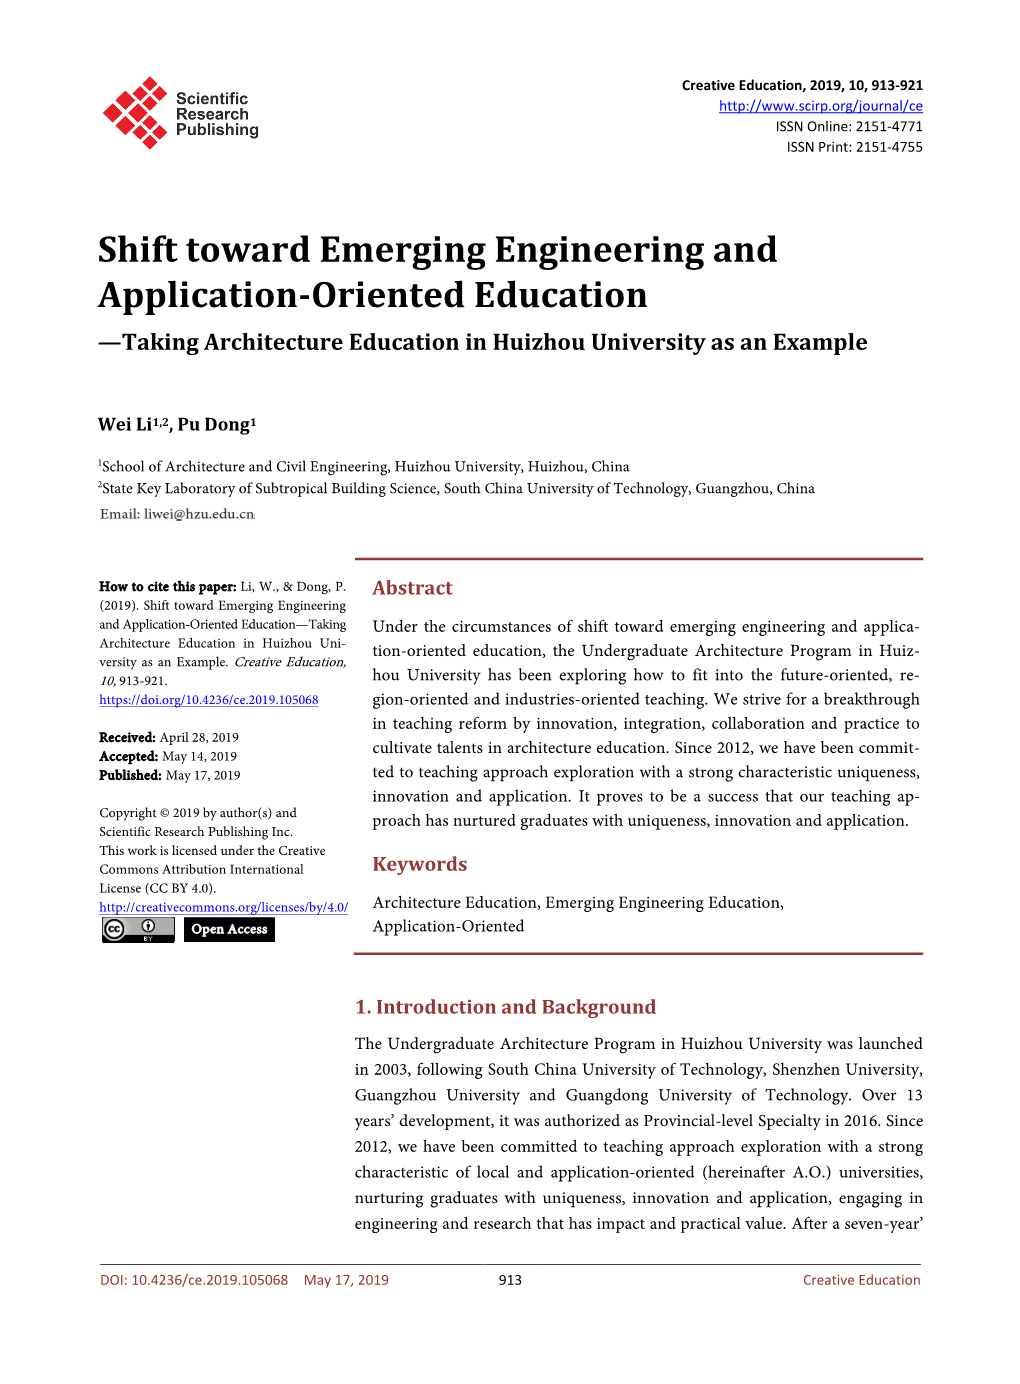 Shift Toward Emerging Engineering and Application-Oriented Education —Taking Architecture Education in Huizhou University As an Example